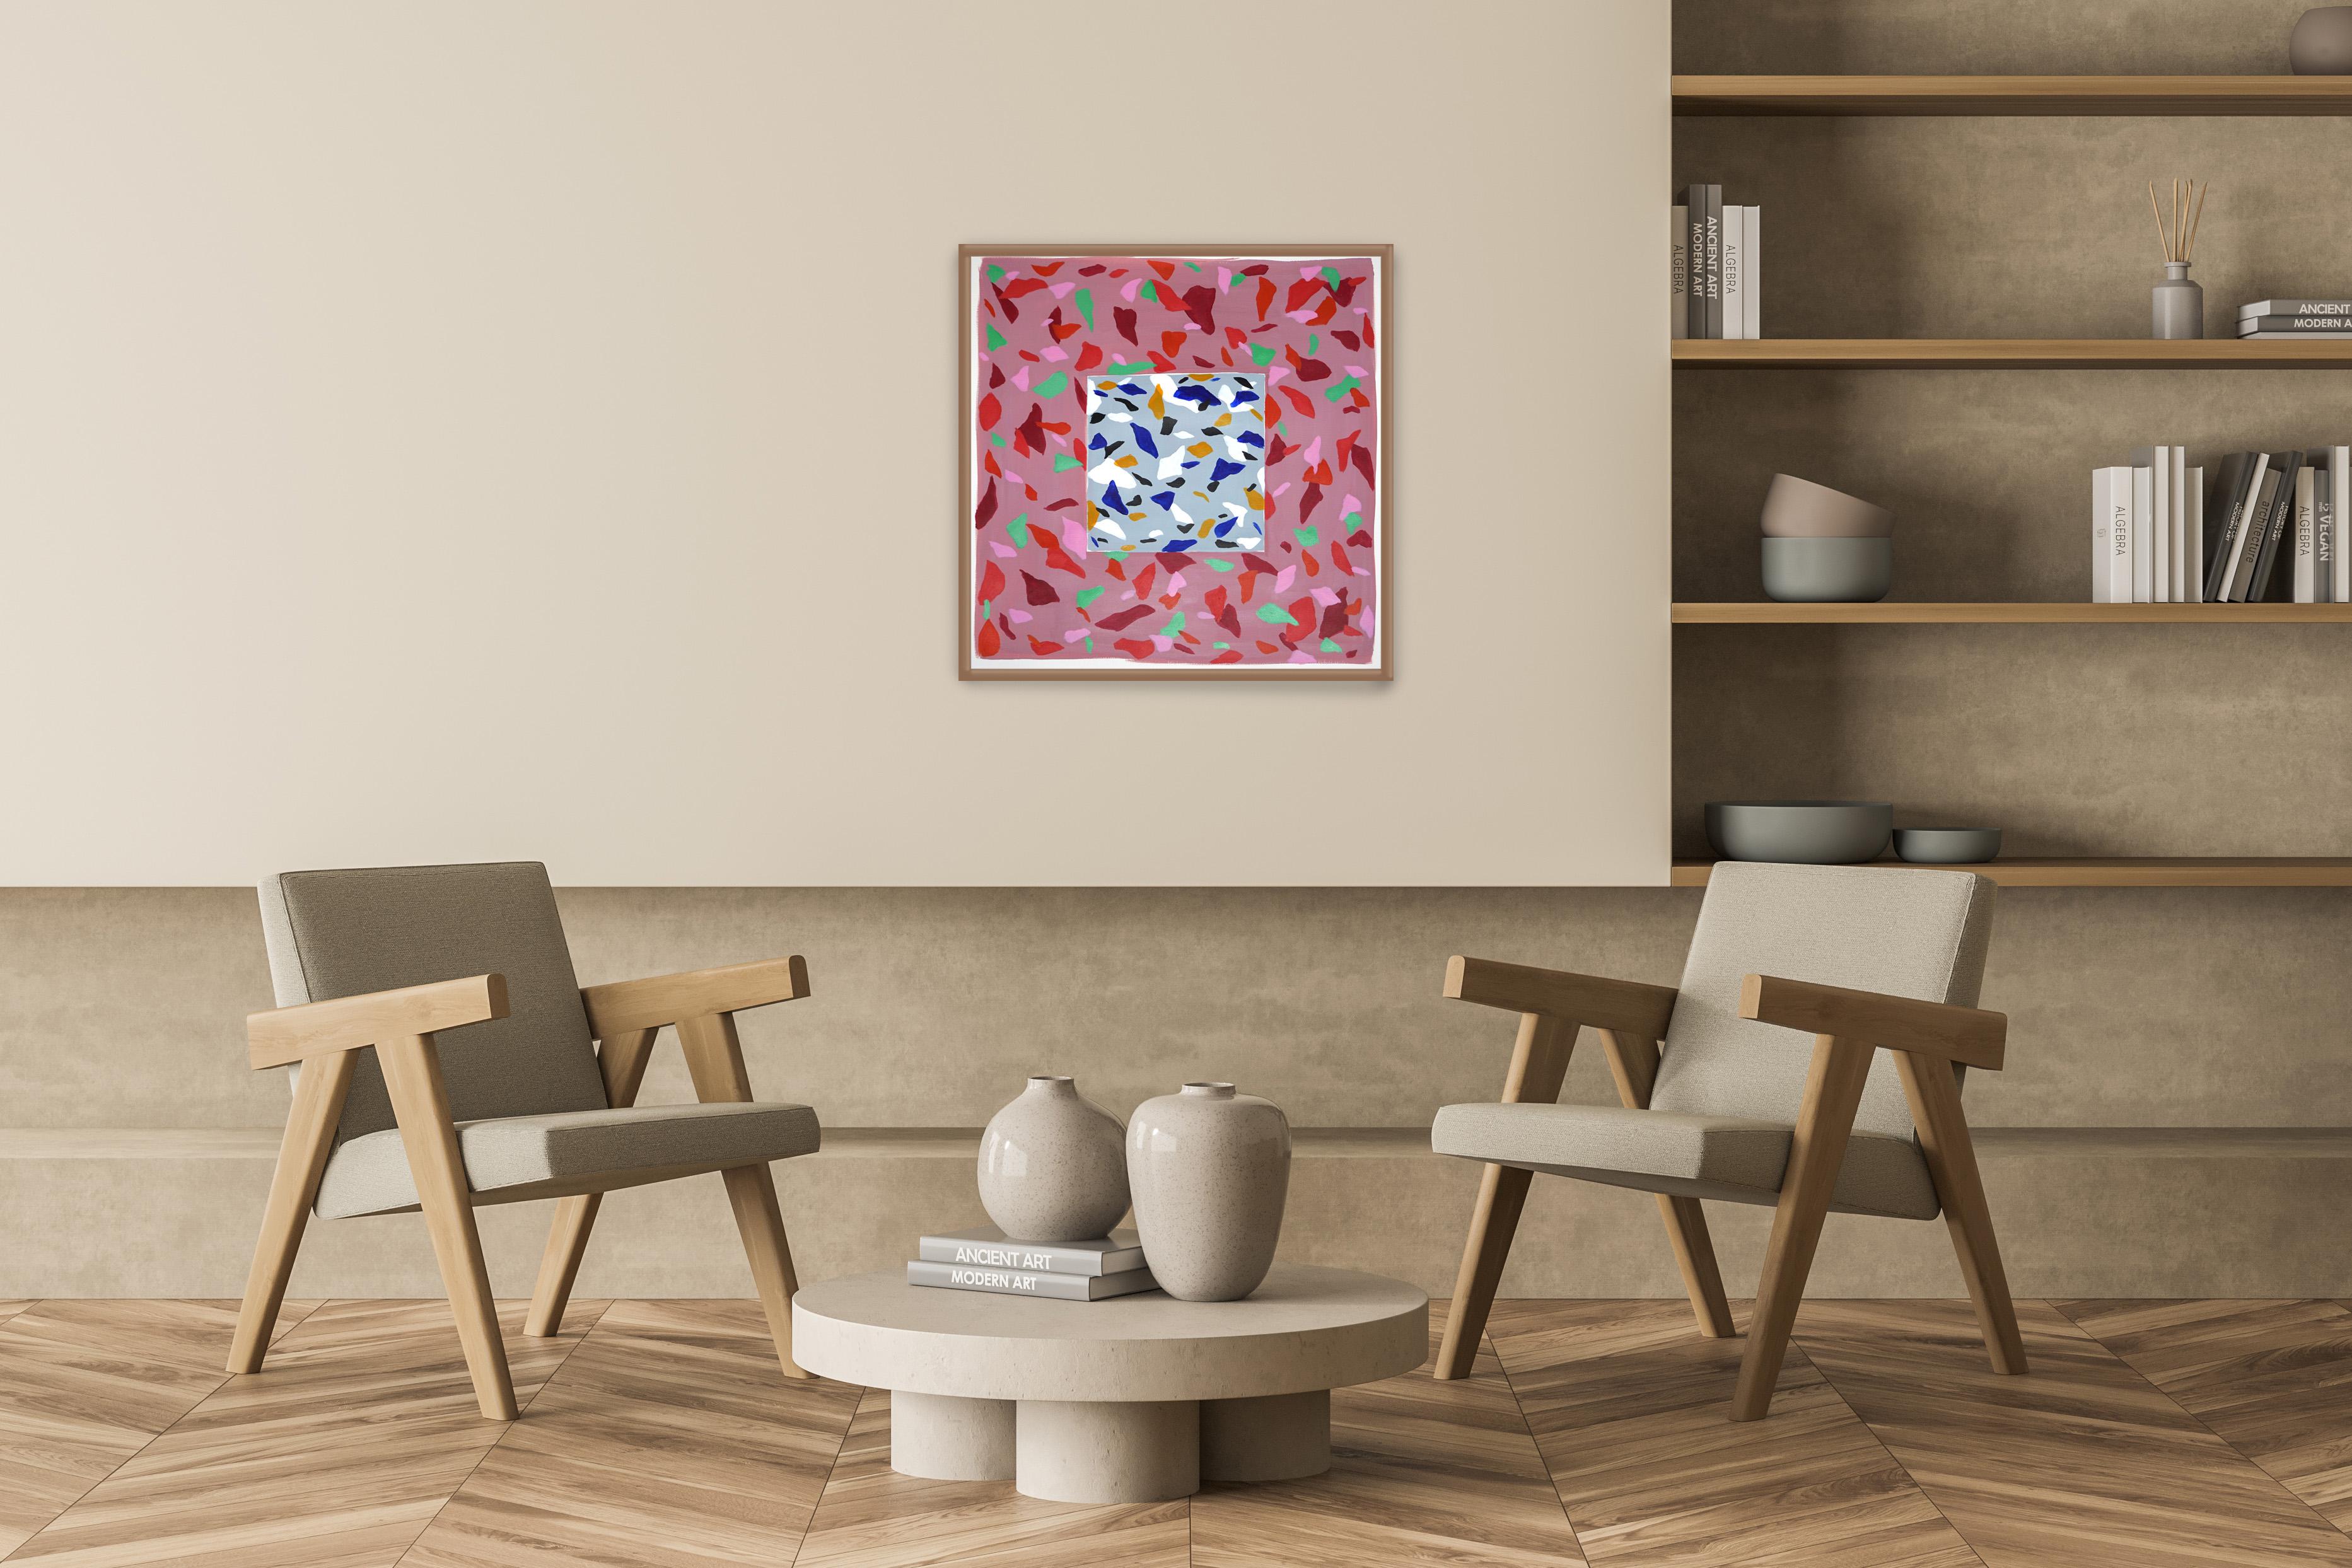 Gray Tile over Strawberry Field, Fresh Tones Terrazzo Tiles, Red Memphis Shapes  - Abstract Geometric Painting by Natalia Roman